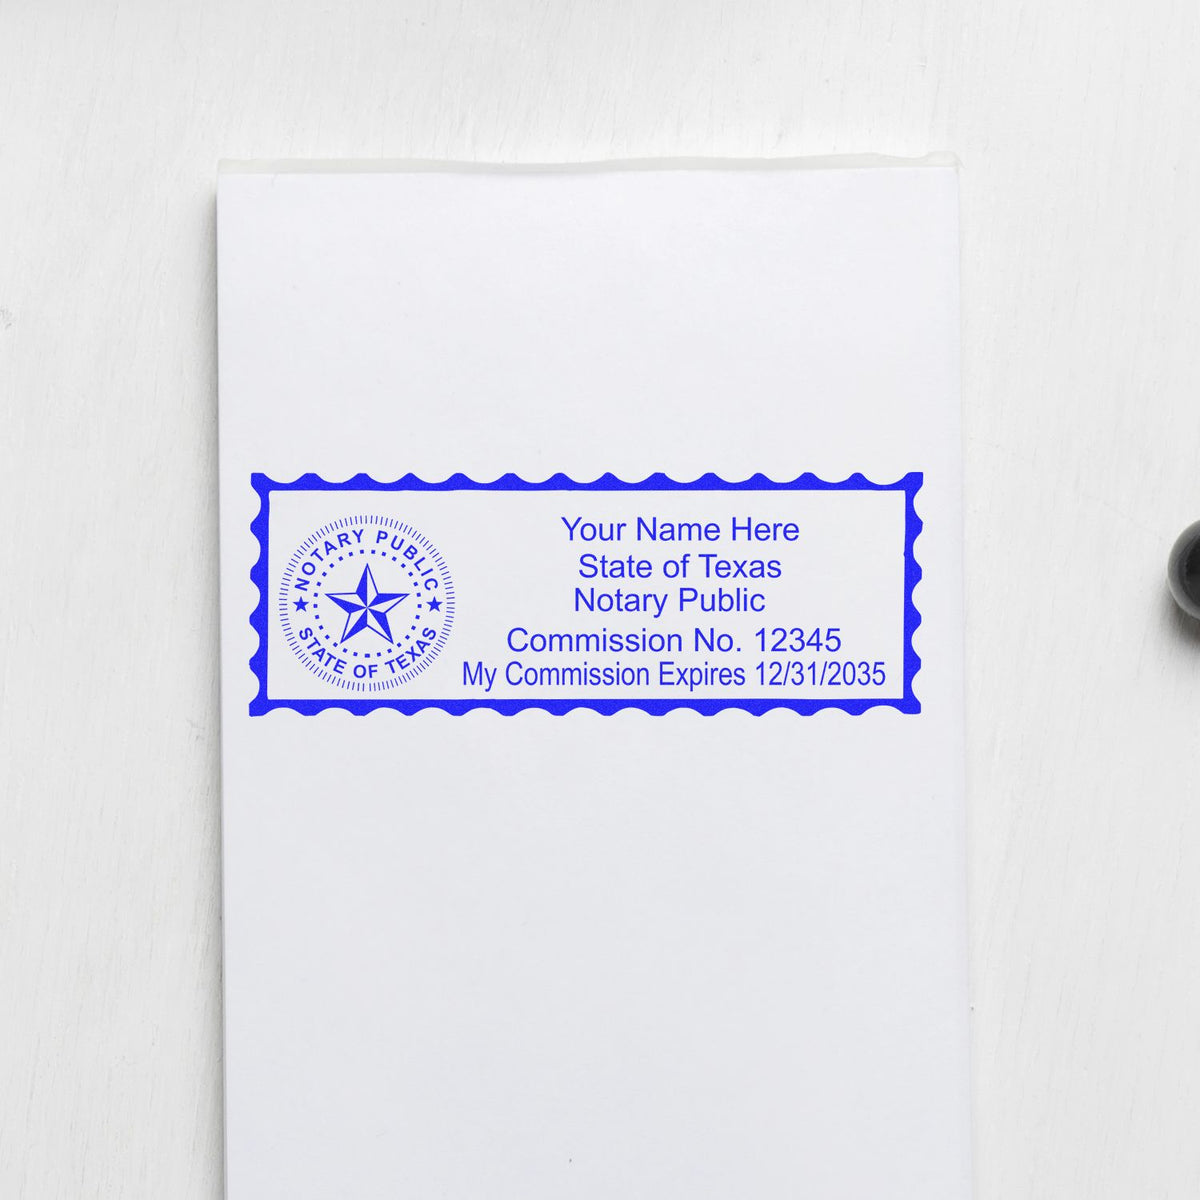 This paper is stamped with a sample imprint of the Slim Pre-Inked State Seal Notary Stamp for Texas, signifying its quality and reliability.